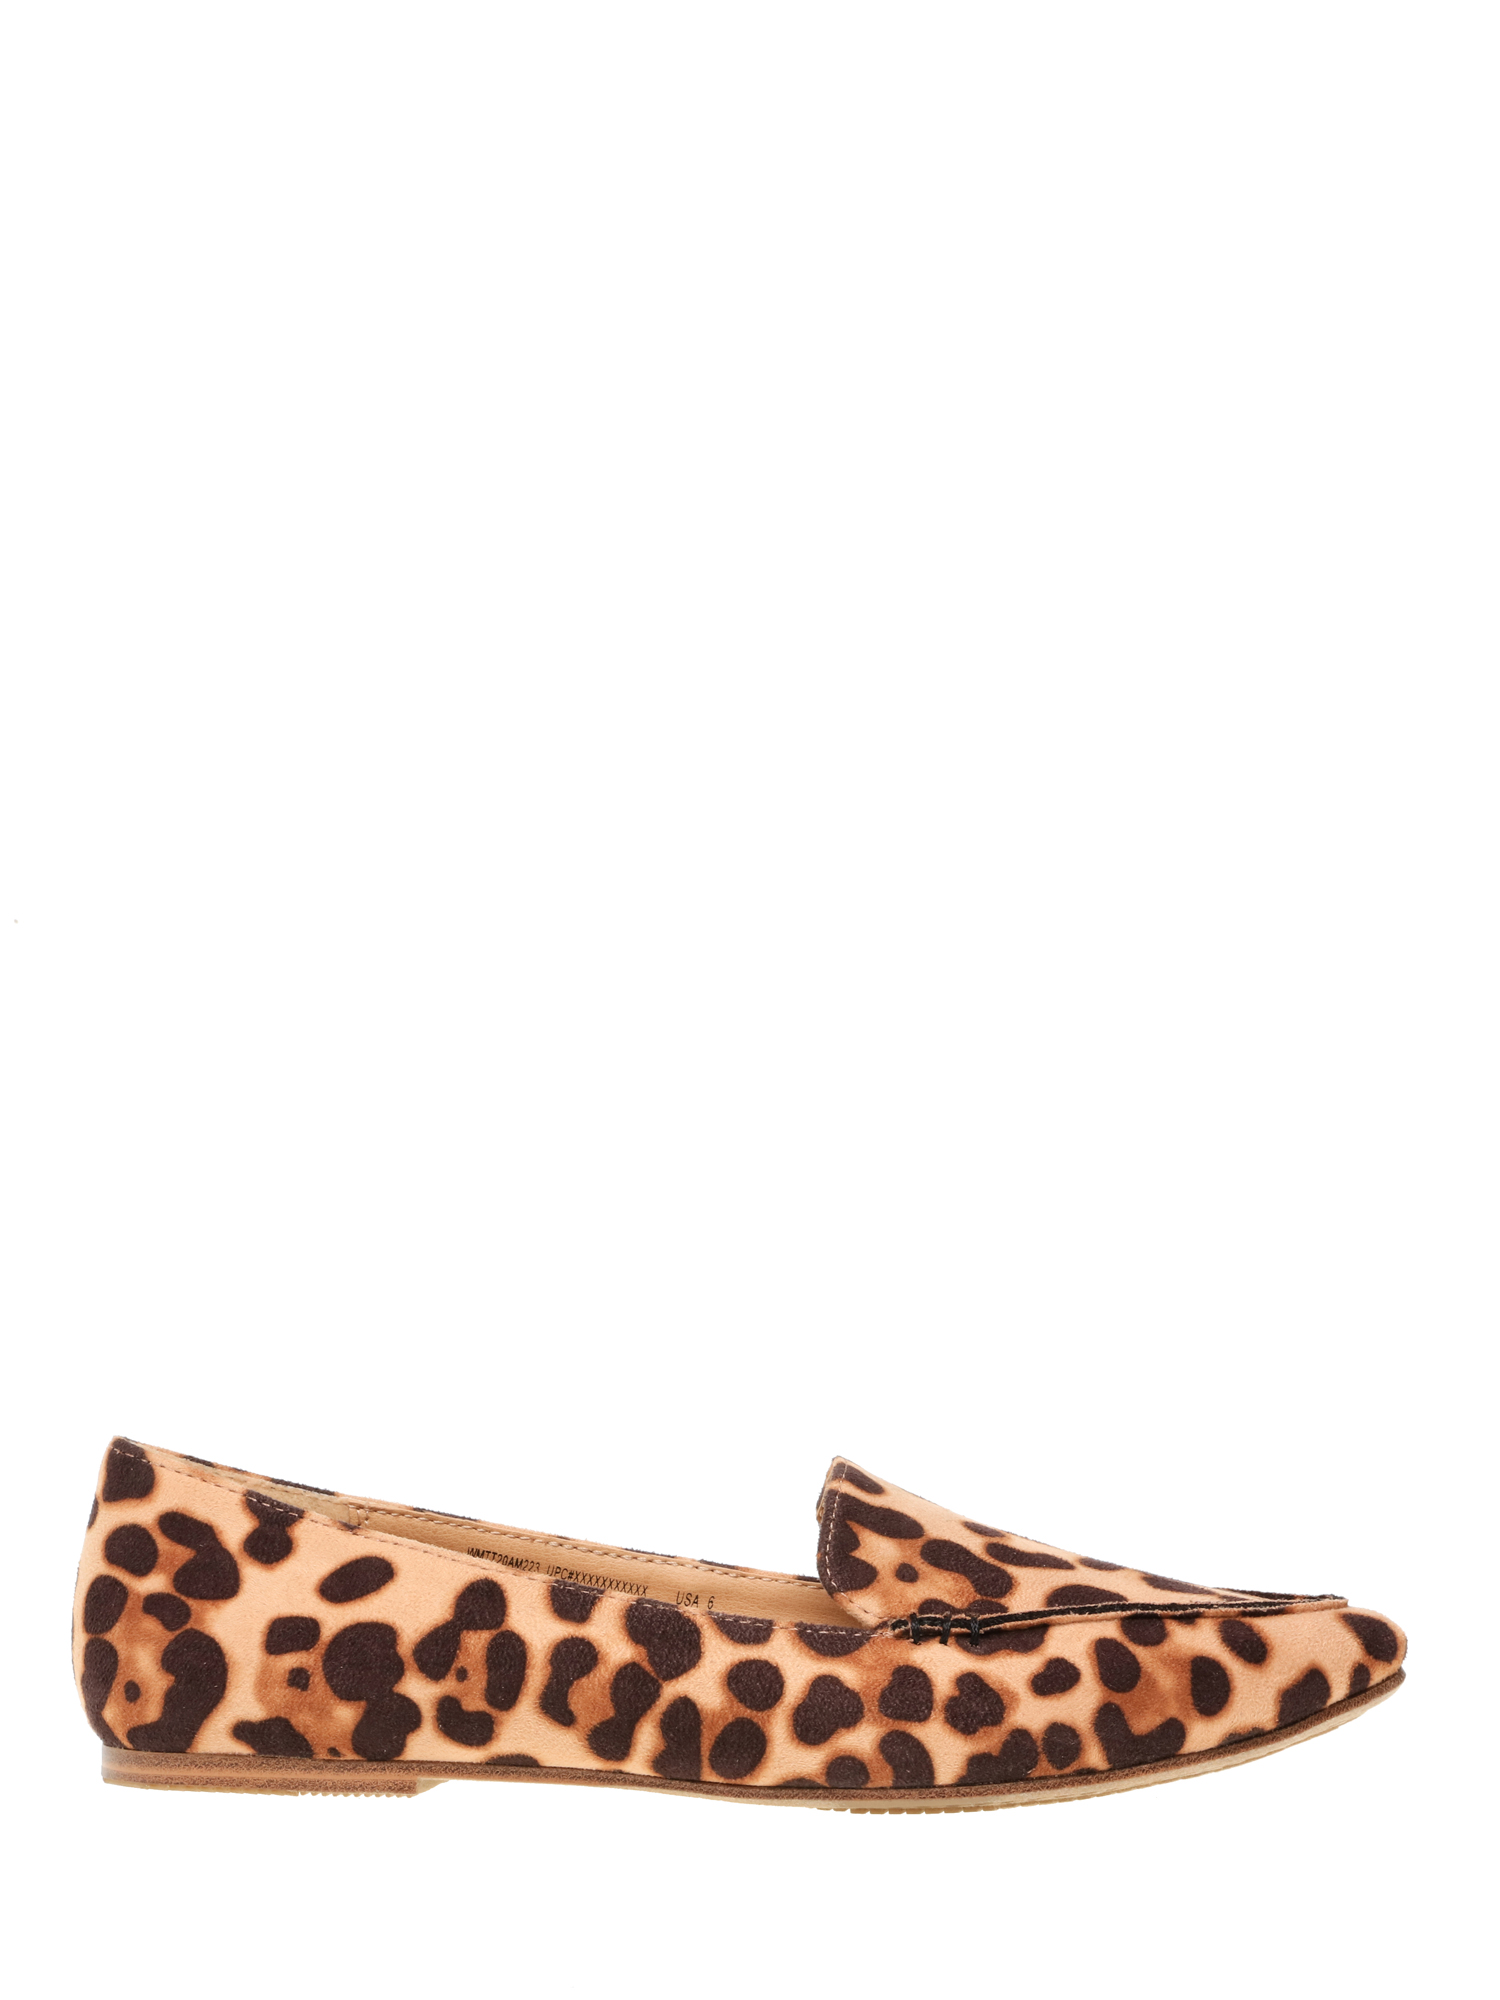 Women's Time and Tru Animal Print Feather Flat - image 5 of 6